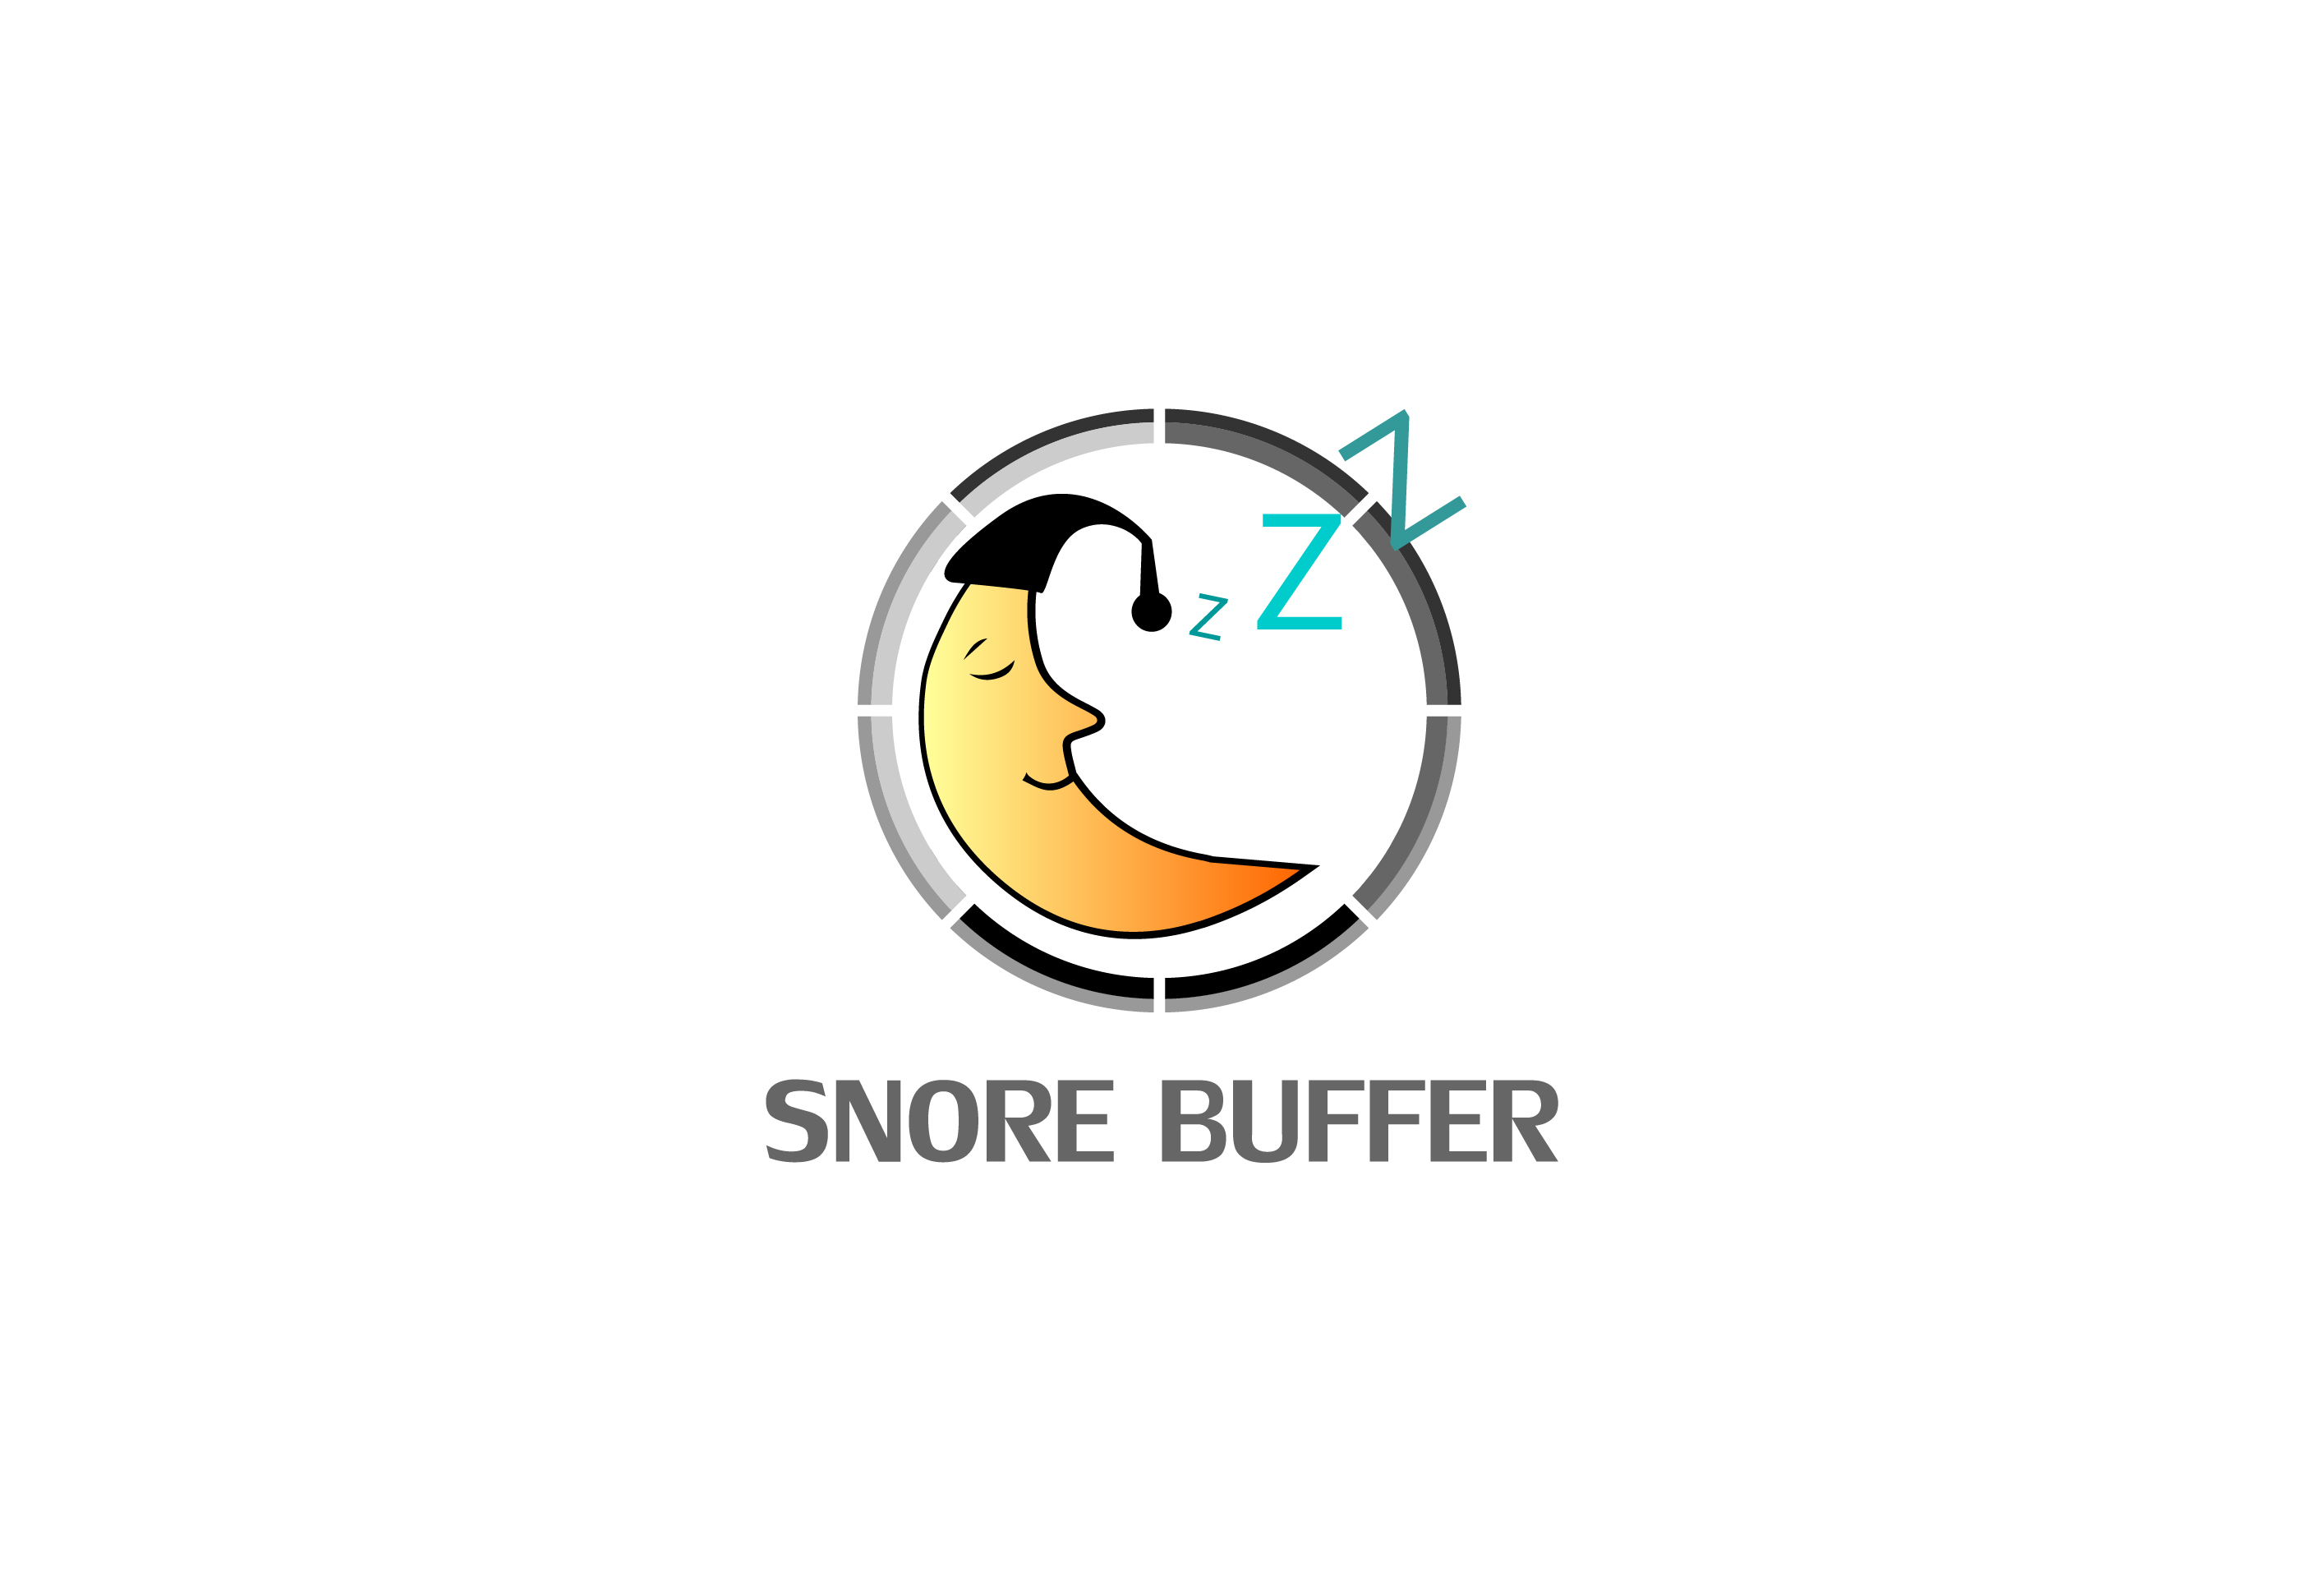 Wake up well rested with the Snore Buffer